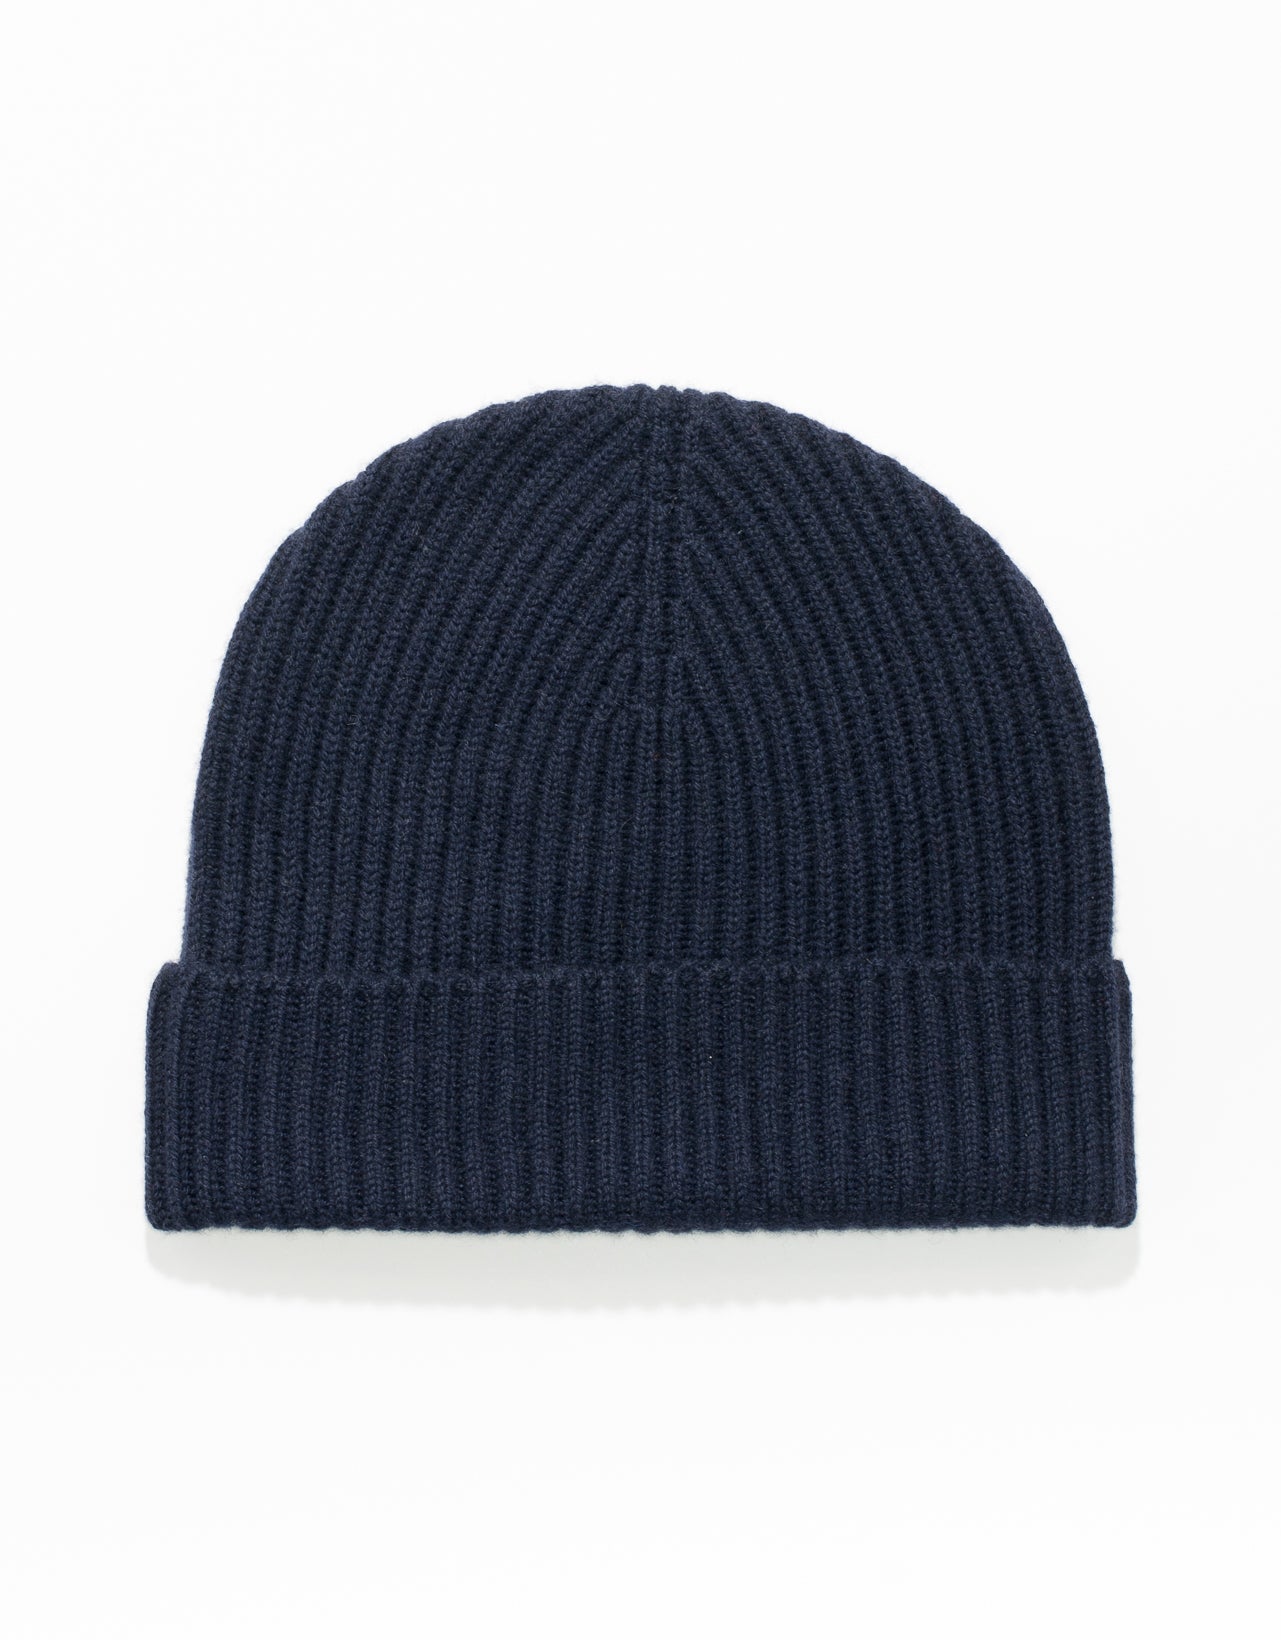 CASHMERE RIBBED HAT - NAVY